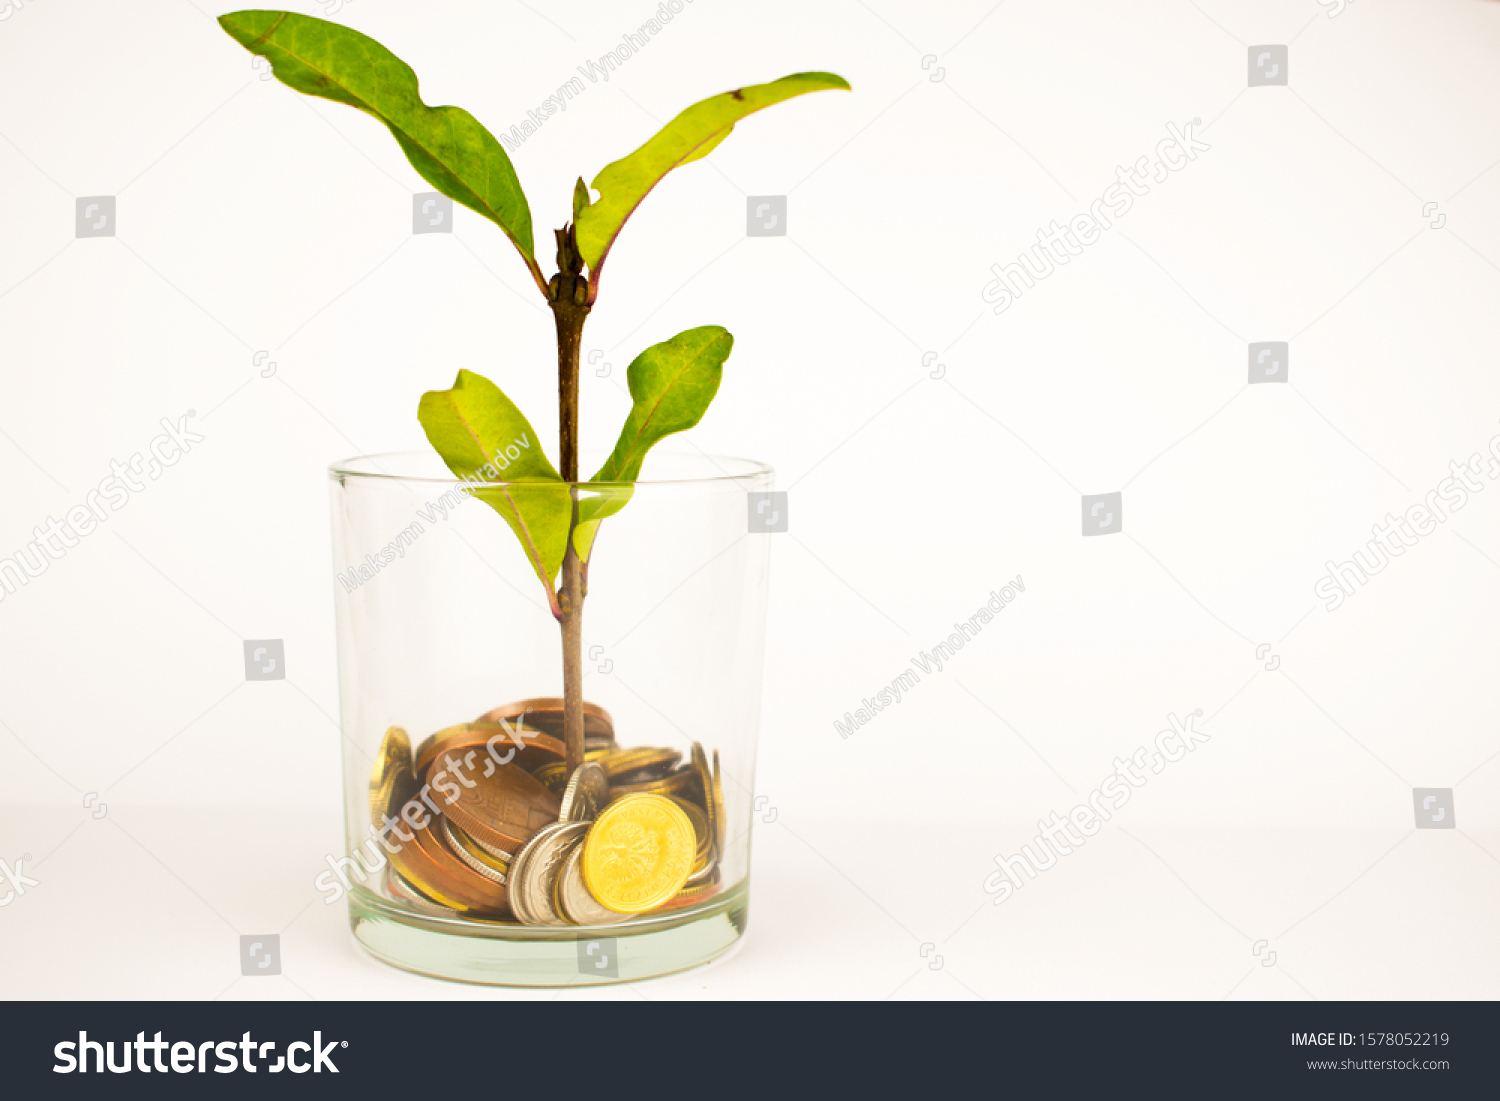 green plant grows from a pot of coins. Growing business investment. #1578052219